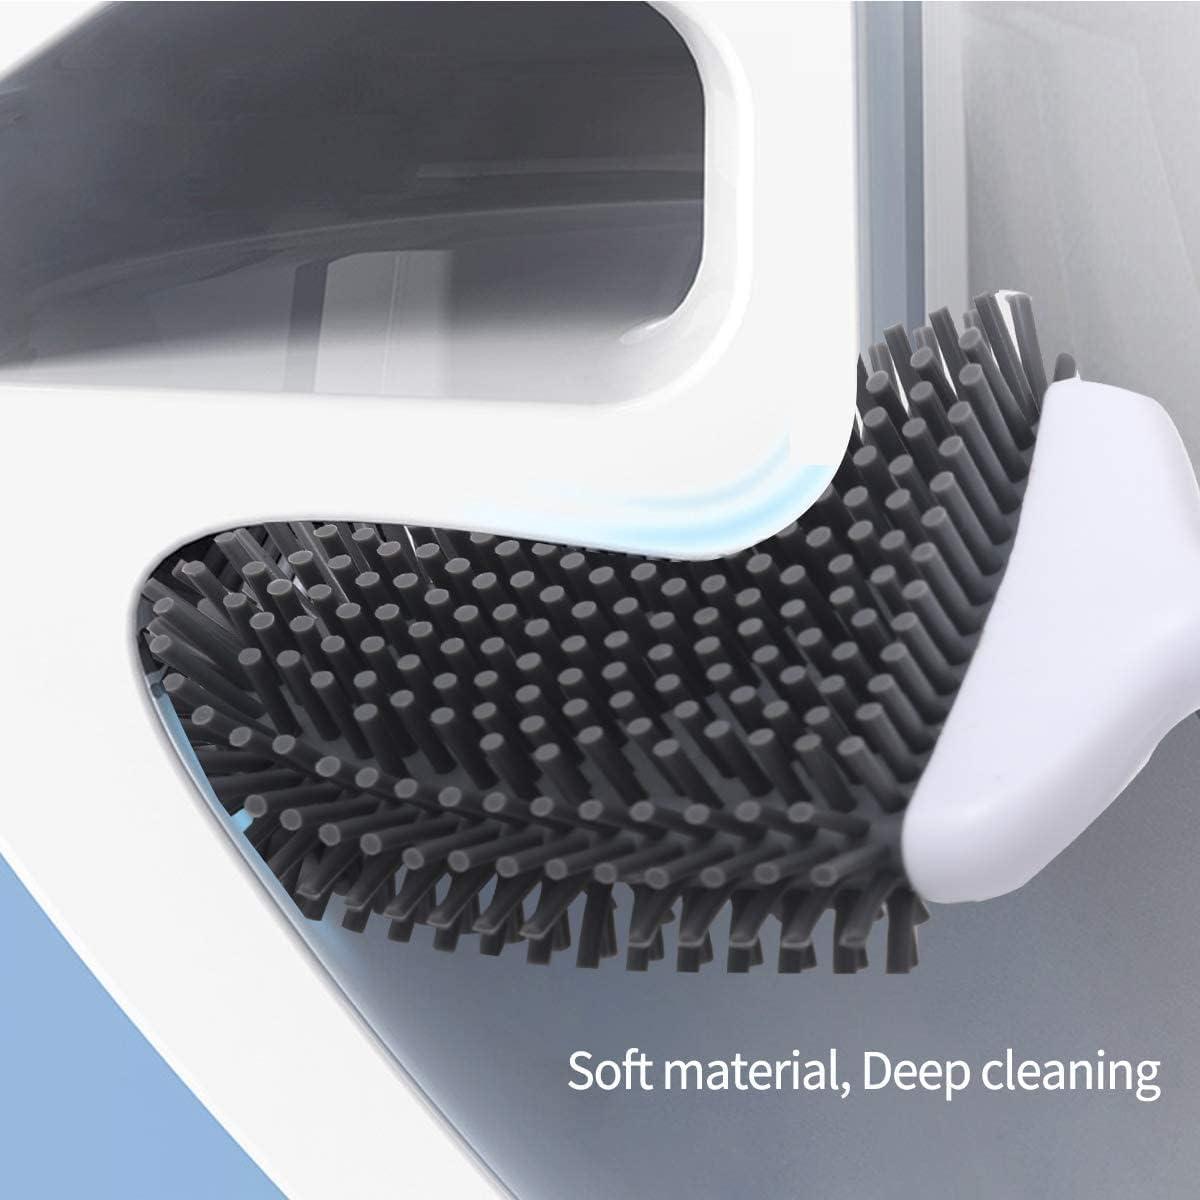 Lamgool Multifunctional Double Sided Silicone Toilet Brush Bunnings With  Silicone Soft Bristles For Efficient Bathroom Cleaning 230926 From Huo10,  $11.73